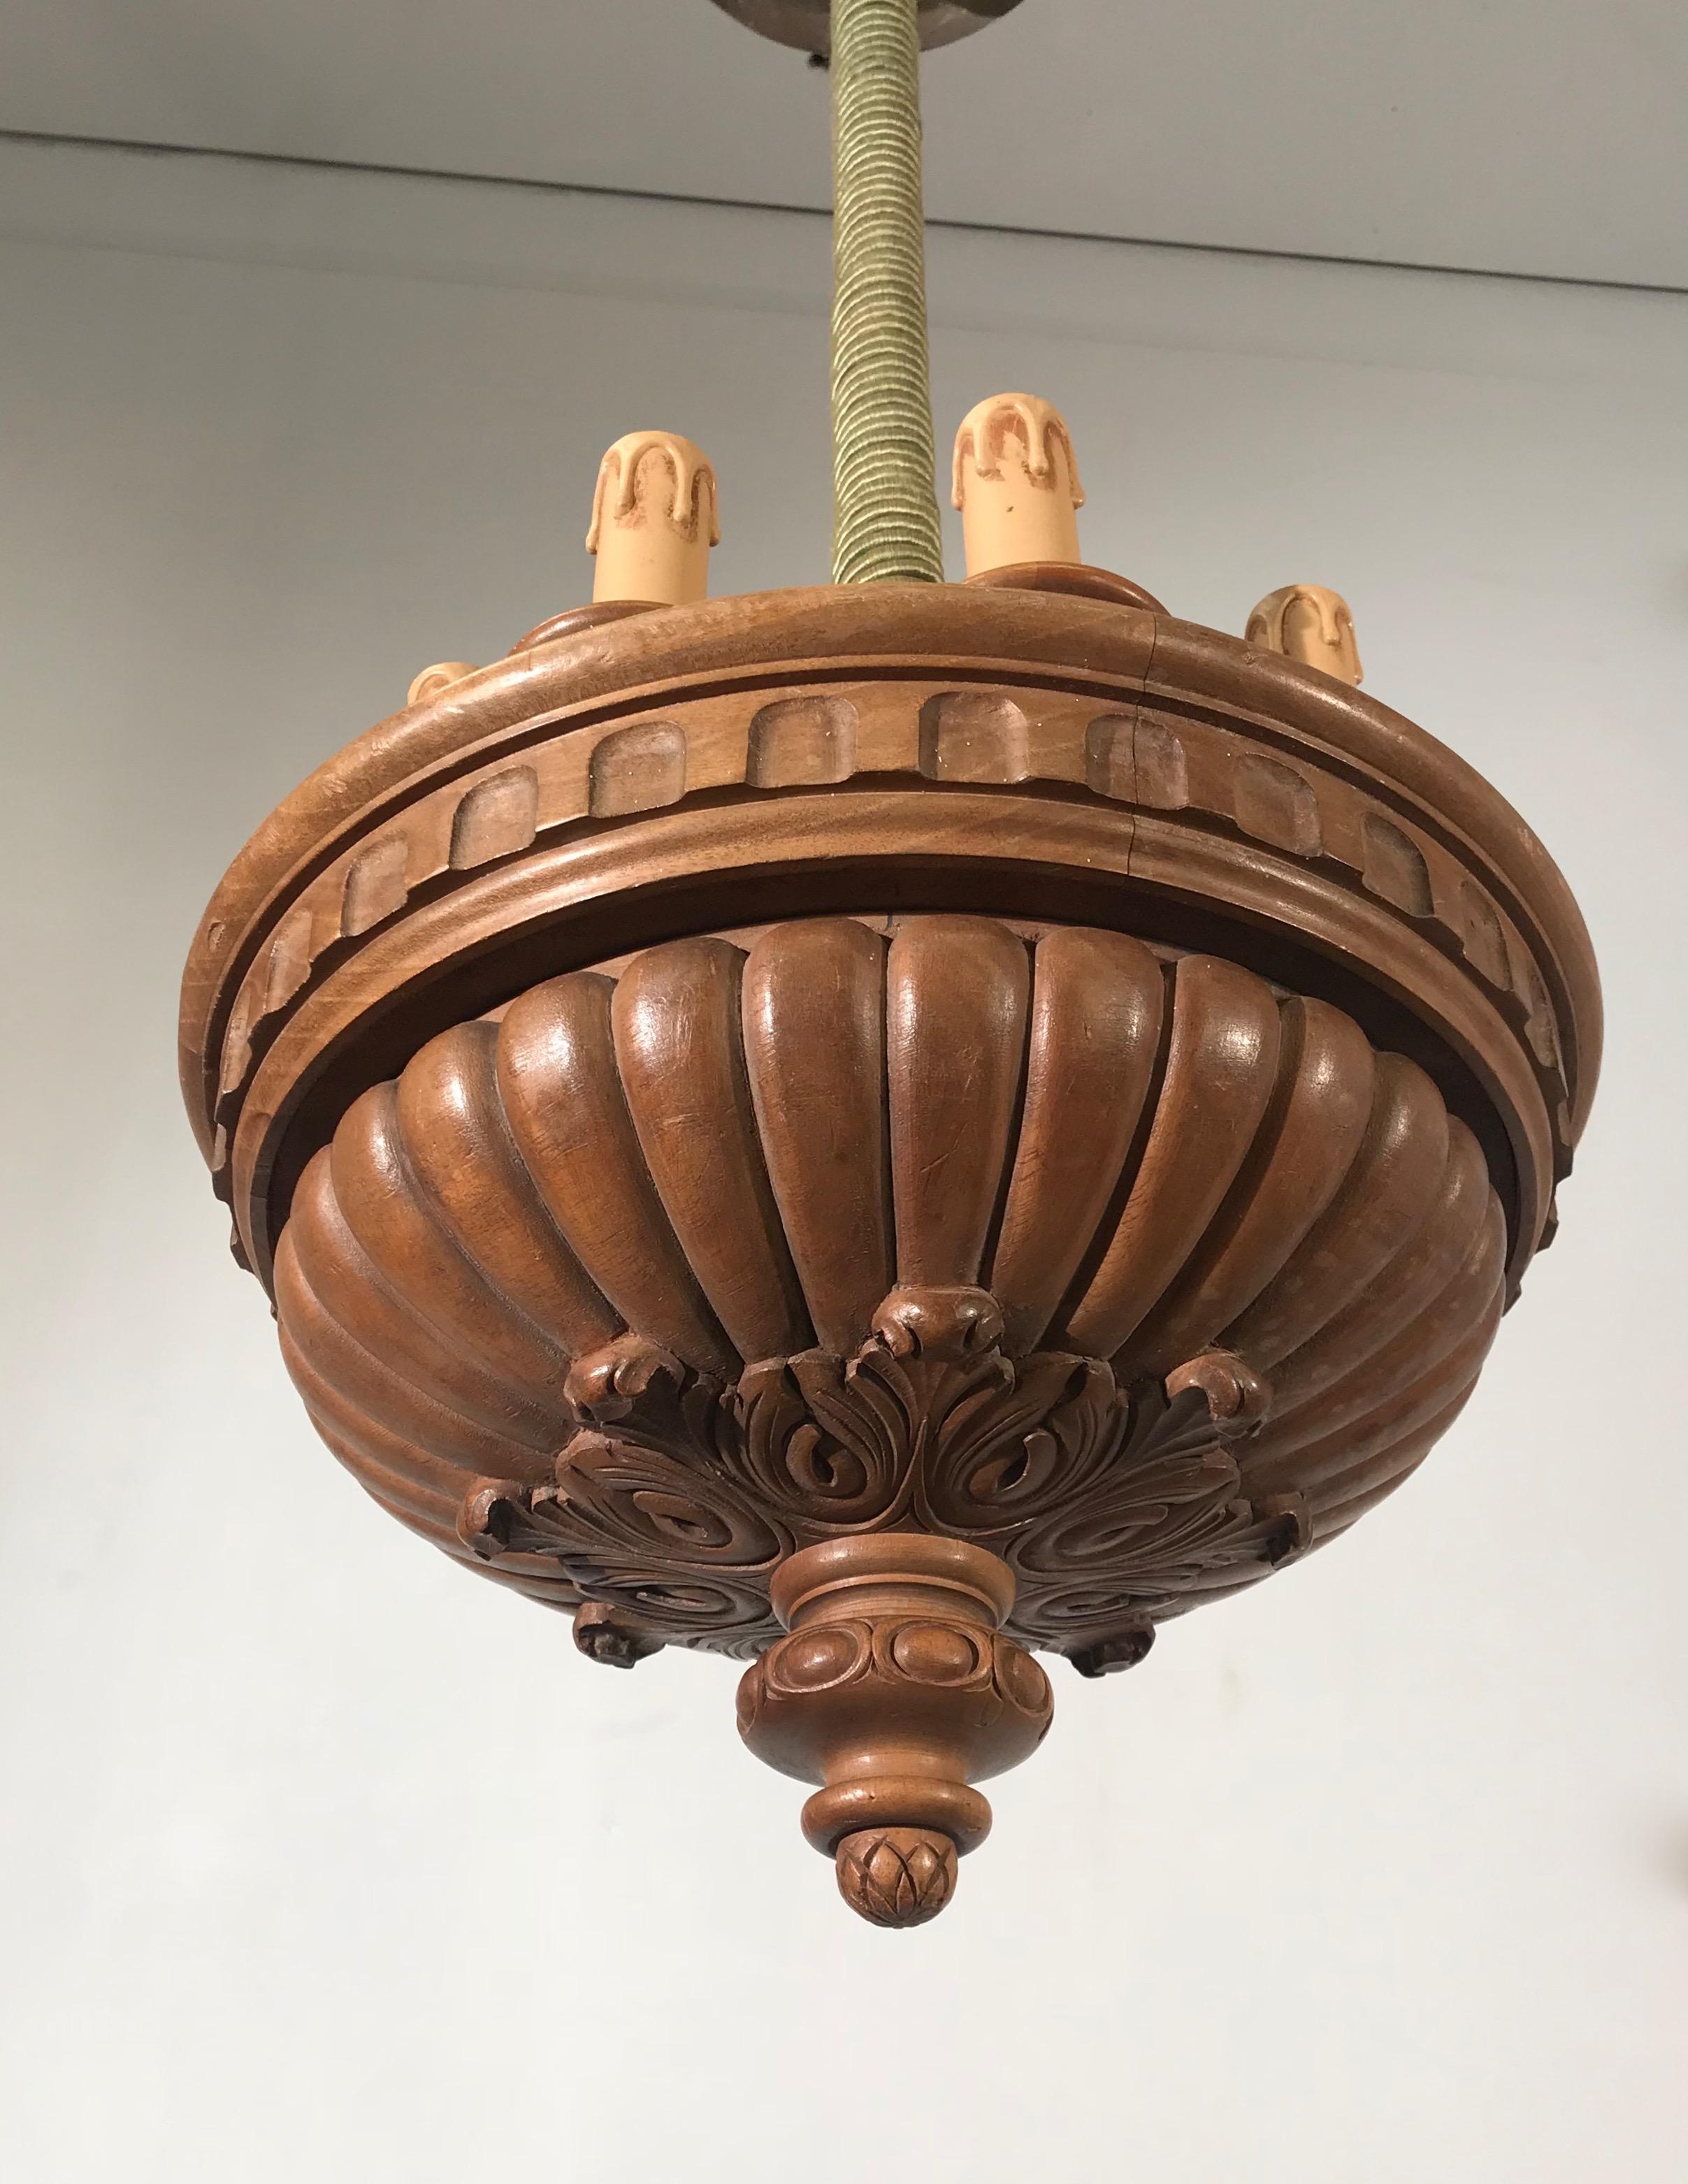 Rare and Decorative Early 1900s Eight-Light Quality Carved Nutwood Pendant Light In Excellent Condition For Sale In Lisse, NL